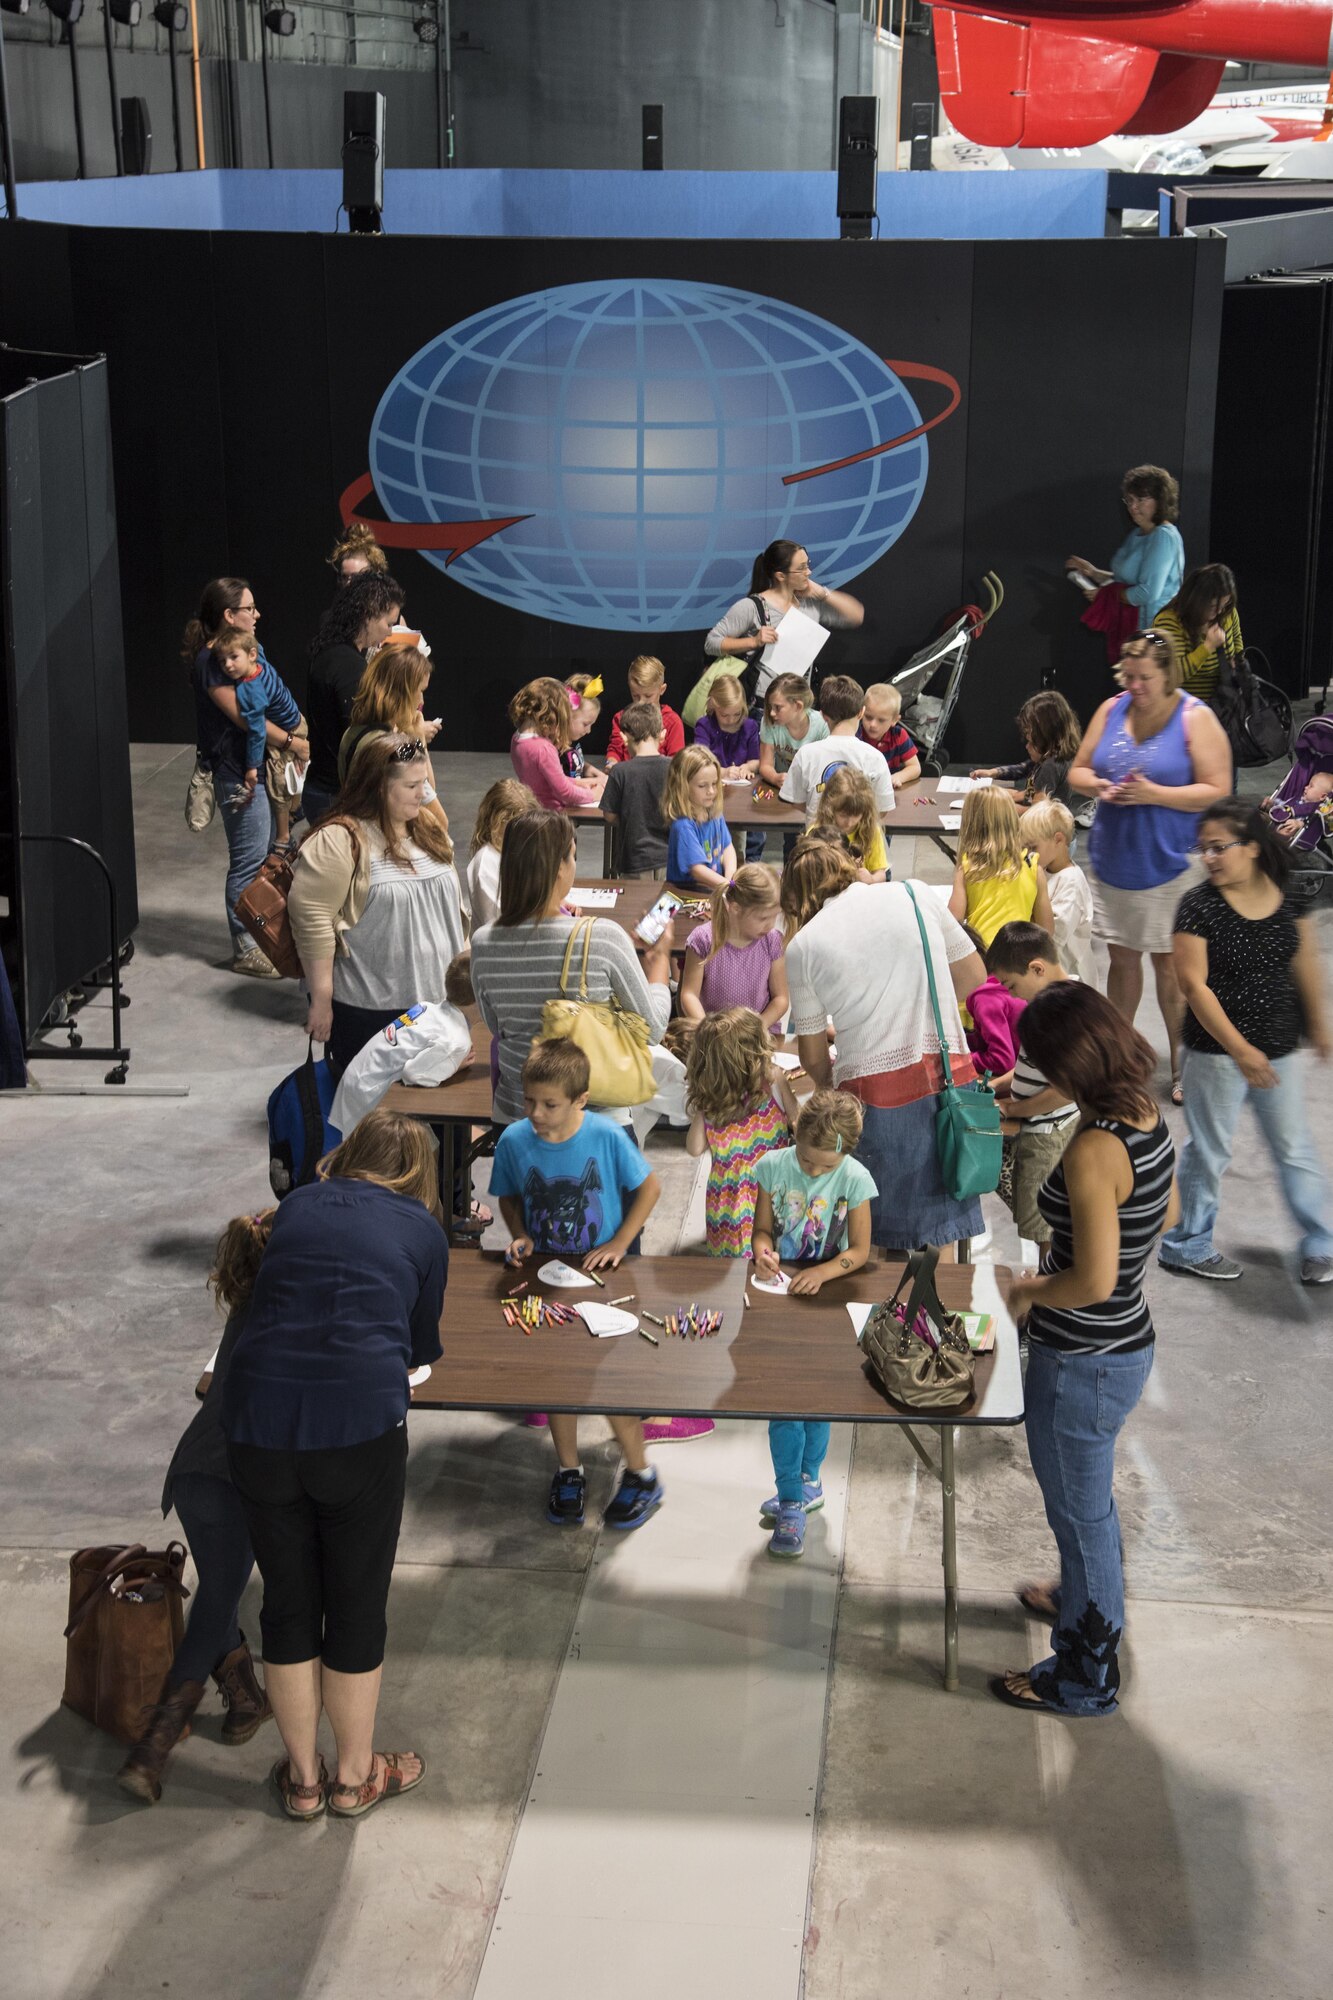 DAYTON, Ohio -- Students participate in Home School STEM Day on Sep. 12, 2016, at the National Museum of the U.S. Air Force. (U.S. Air Force photo)